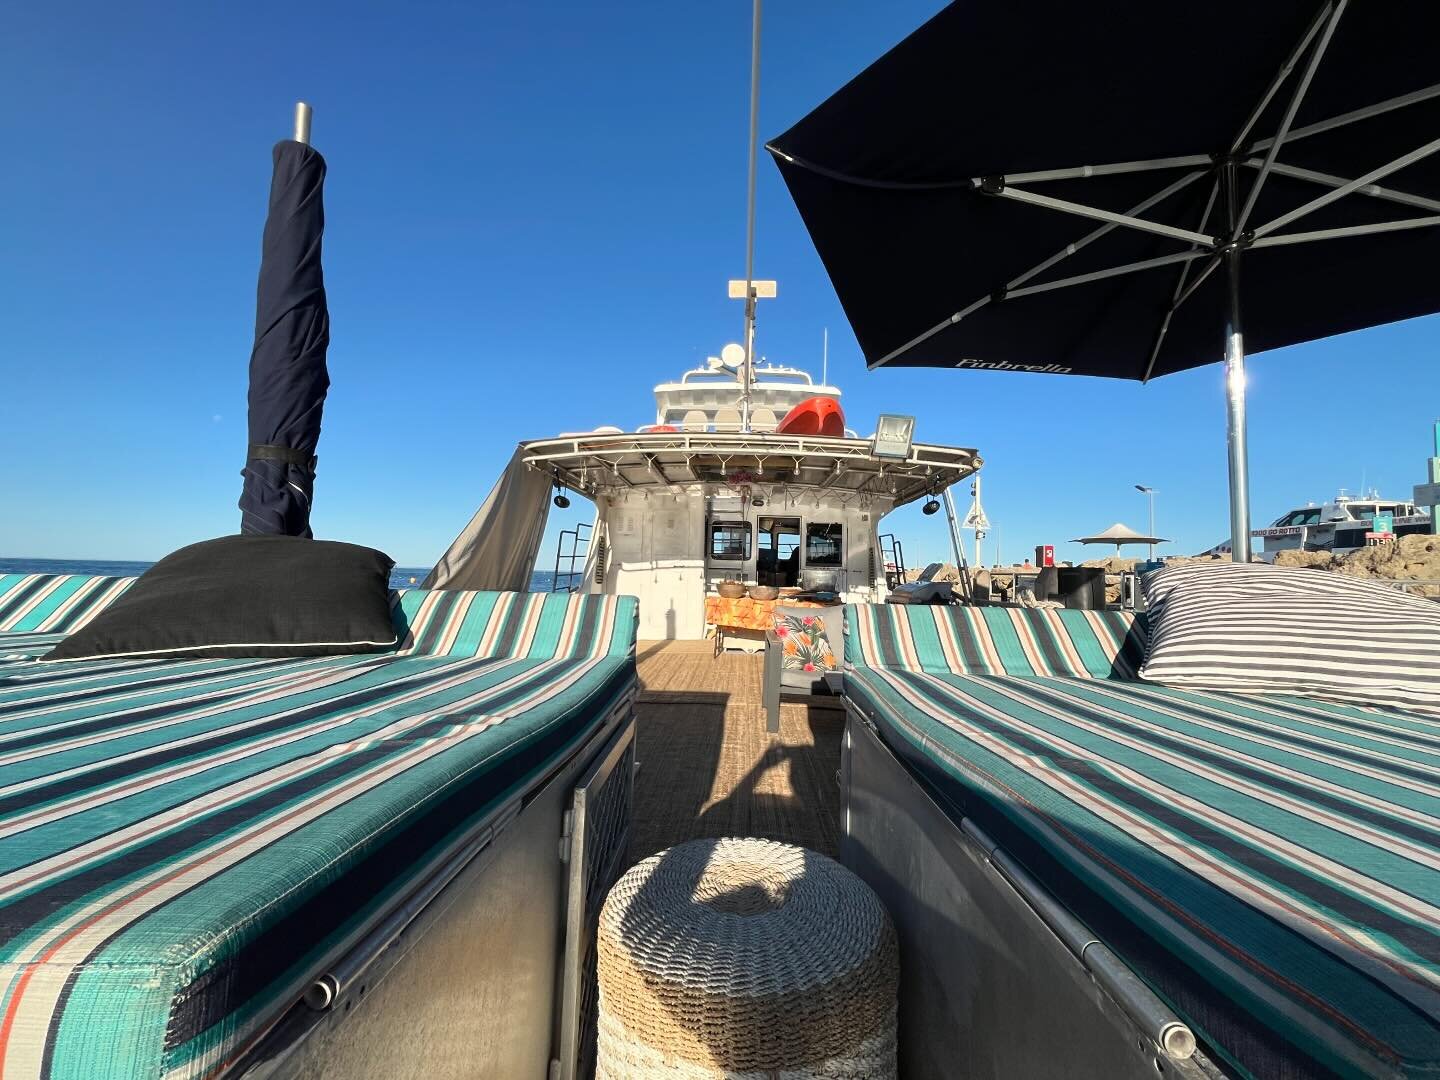 The BiG Mac is gearing up for the Abrolhos Islands! More sunshine, more glamour, more beautiful days on the water! Who&rsquo;s coming with us!!! If you&rsquo;re interested in joining us on our Abrolhos live aboard charters, get in touch. Tour dates a